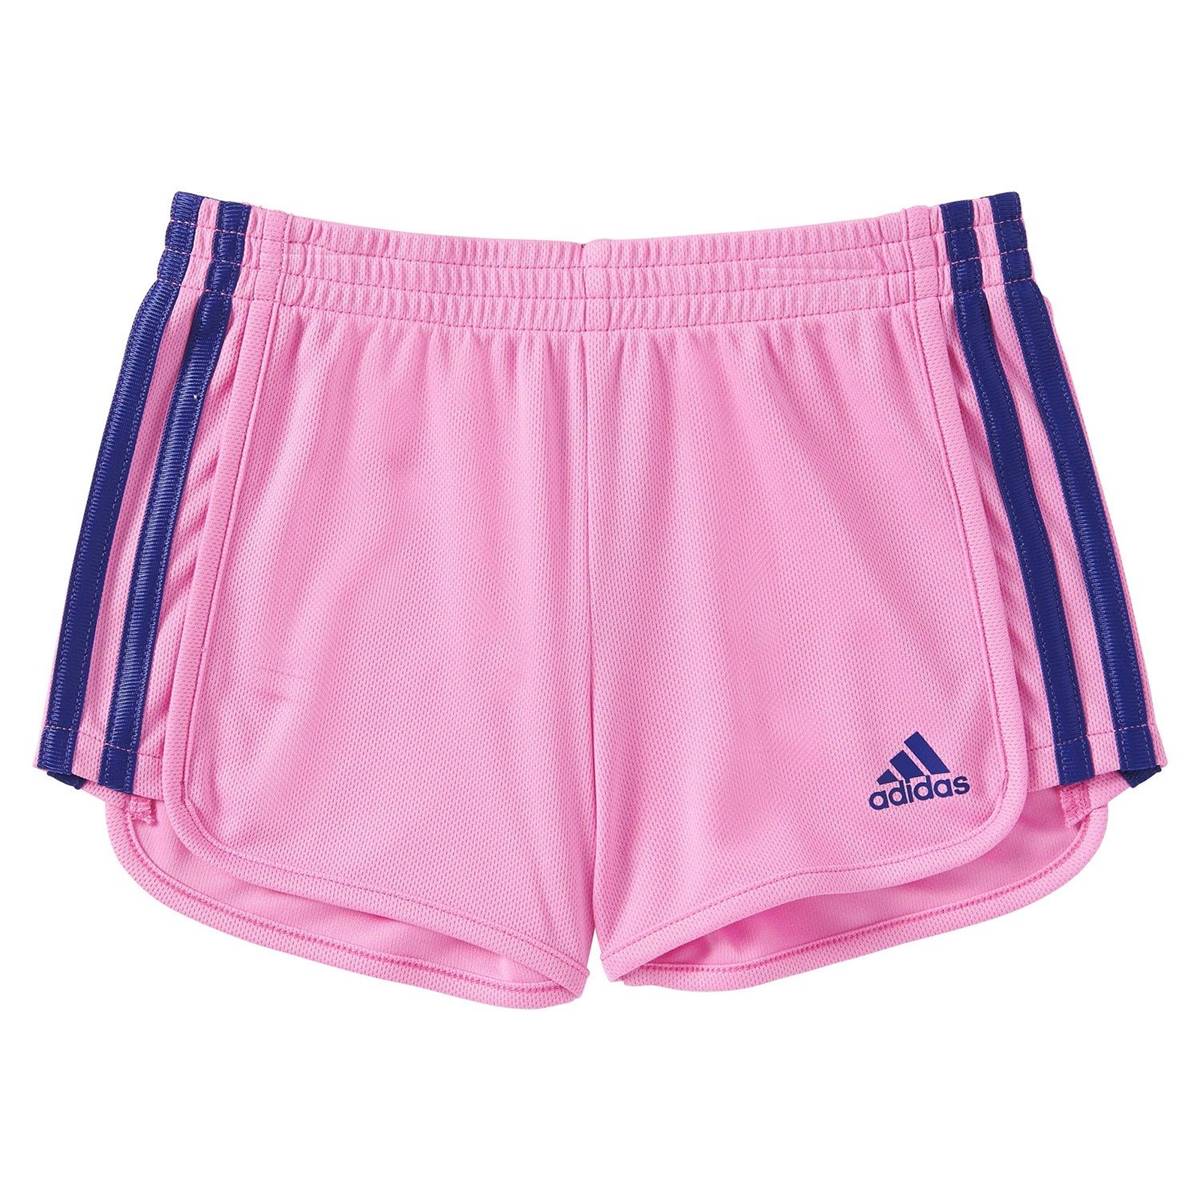 10 Superior Girls’ Athletic Shorts For 2023